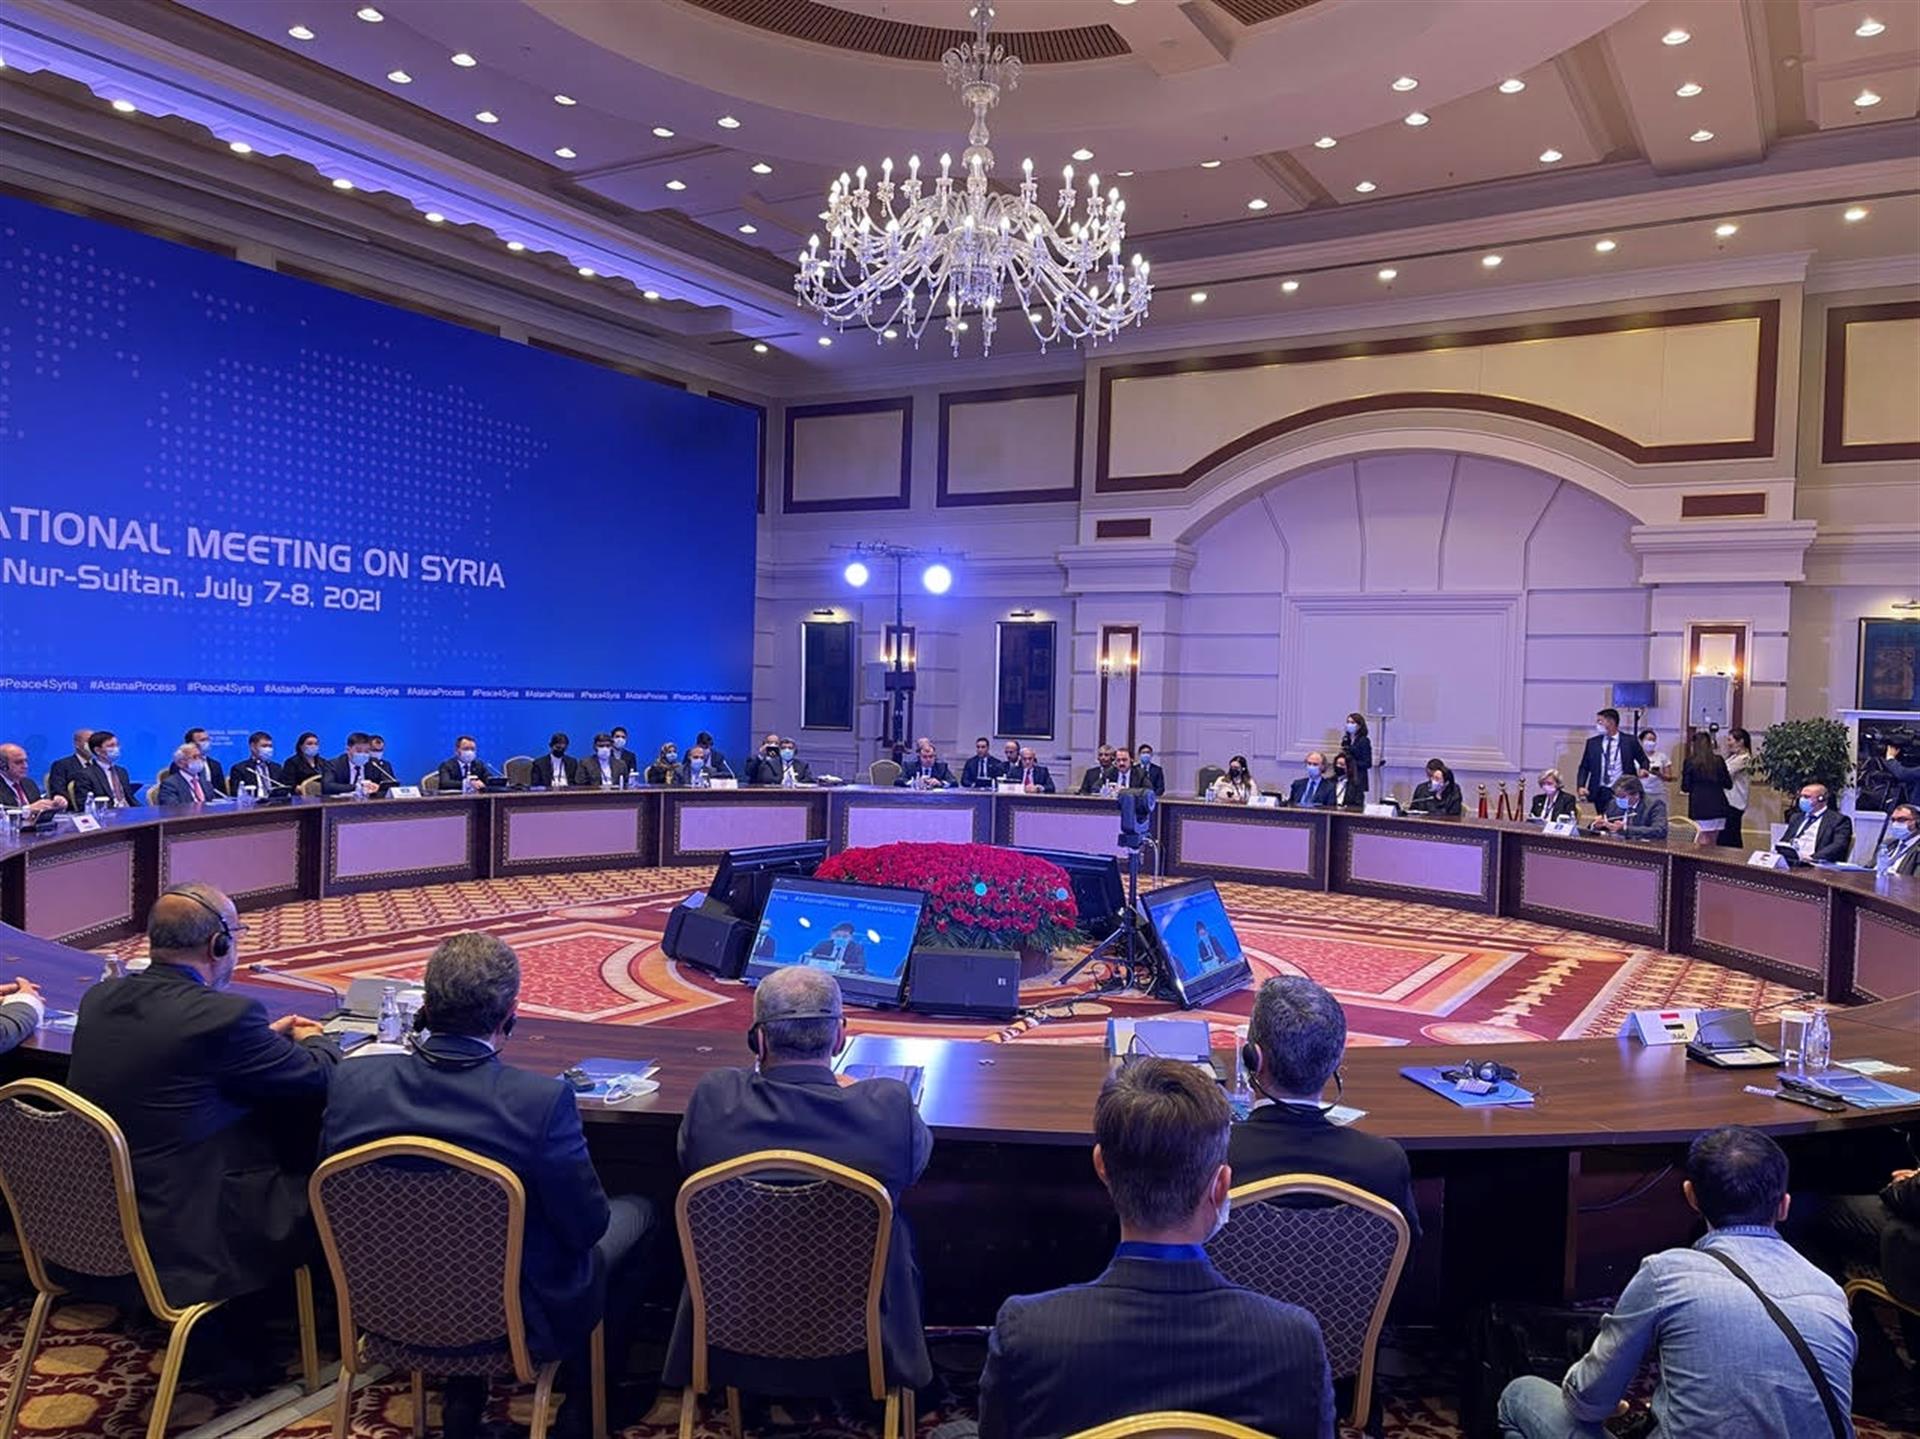 File photo of the plenary session of the sixteenth meeting of the guarantor countries of the ceasefire in Syria, in what is known as the Astana Process. EFE/Kulpash Konyrova
